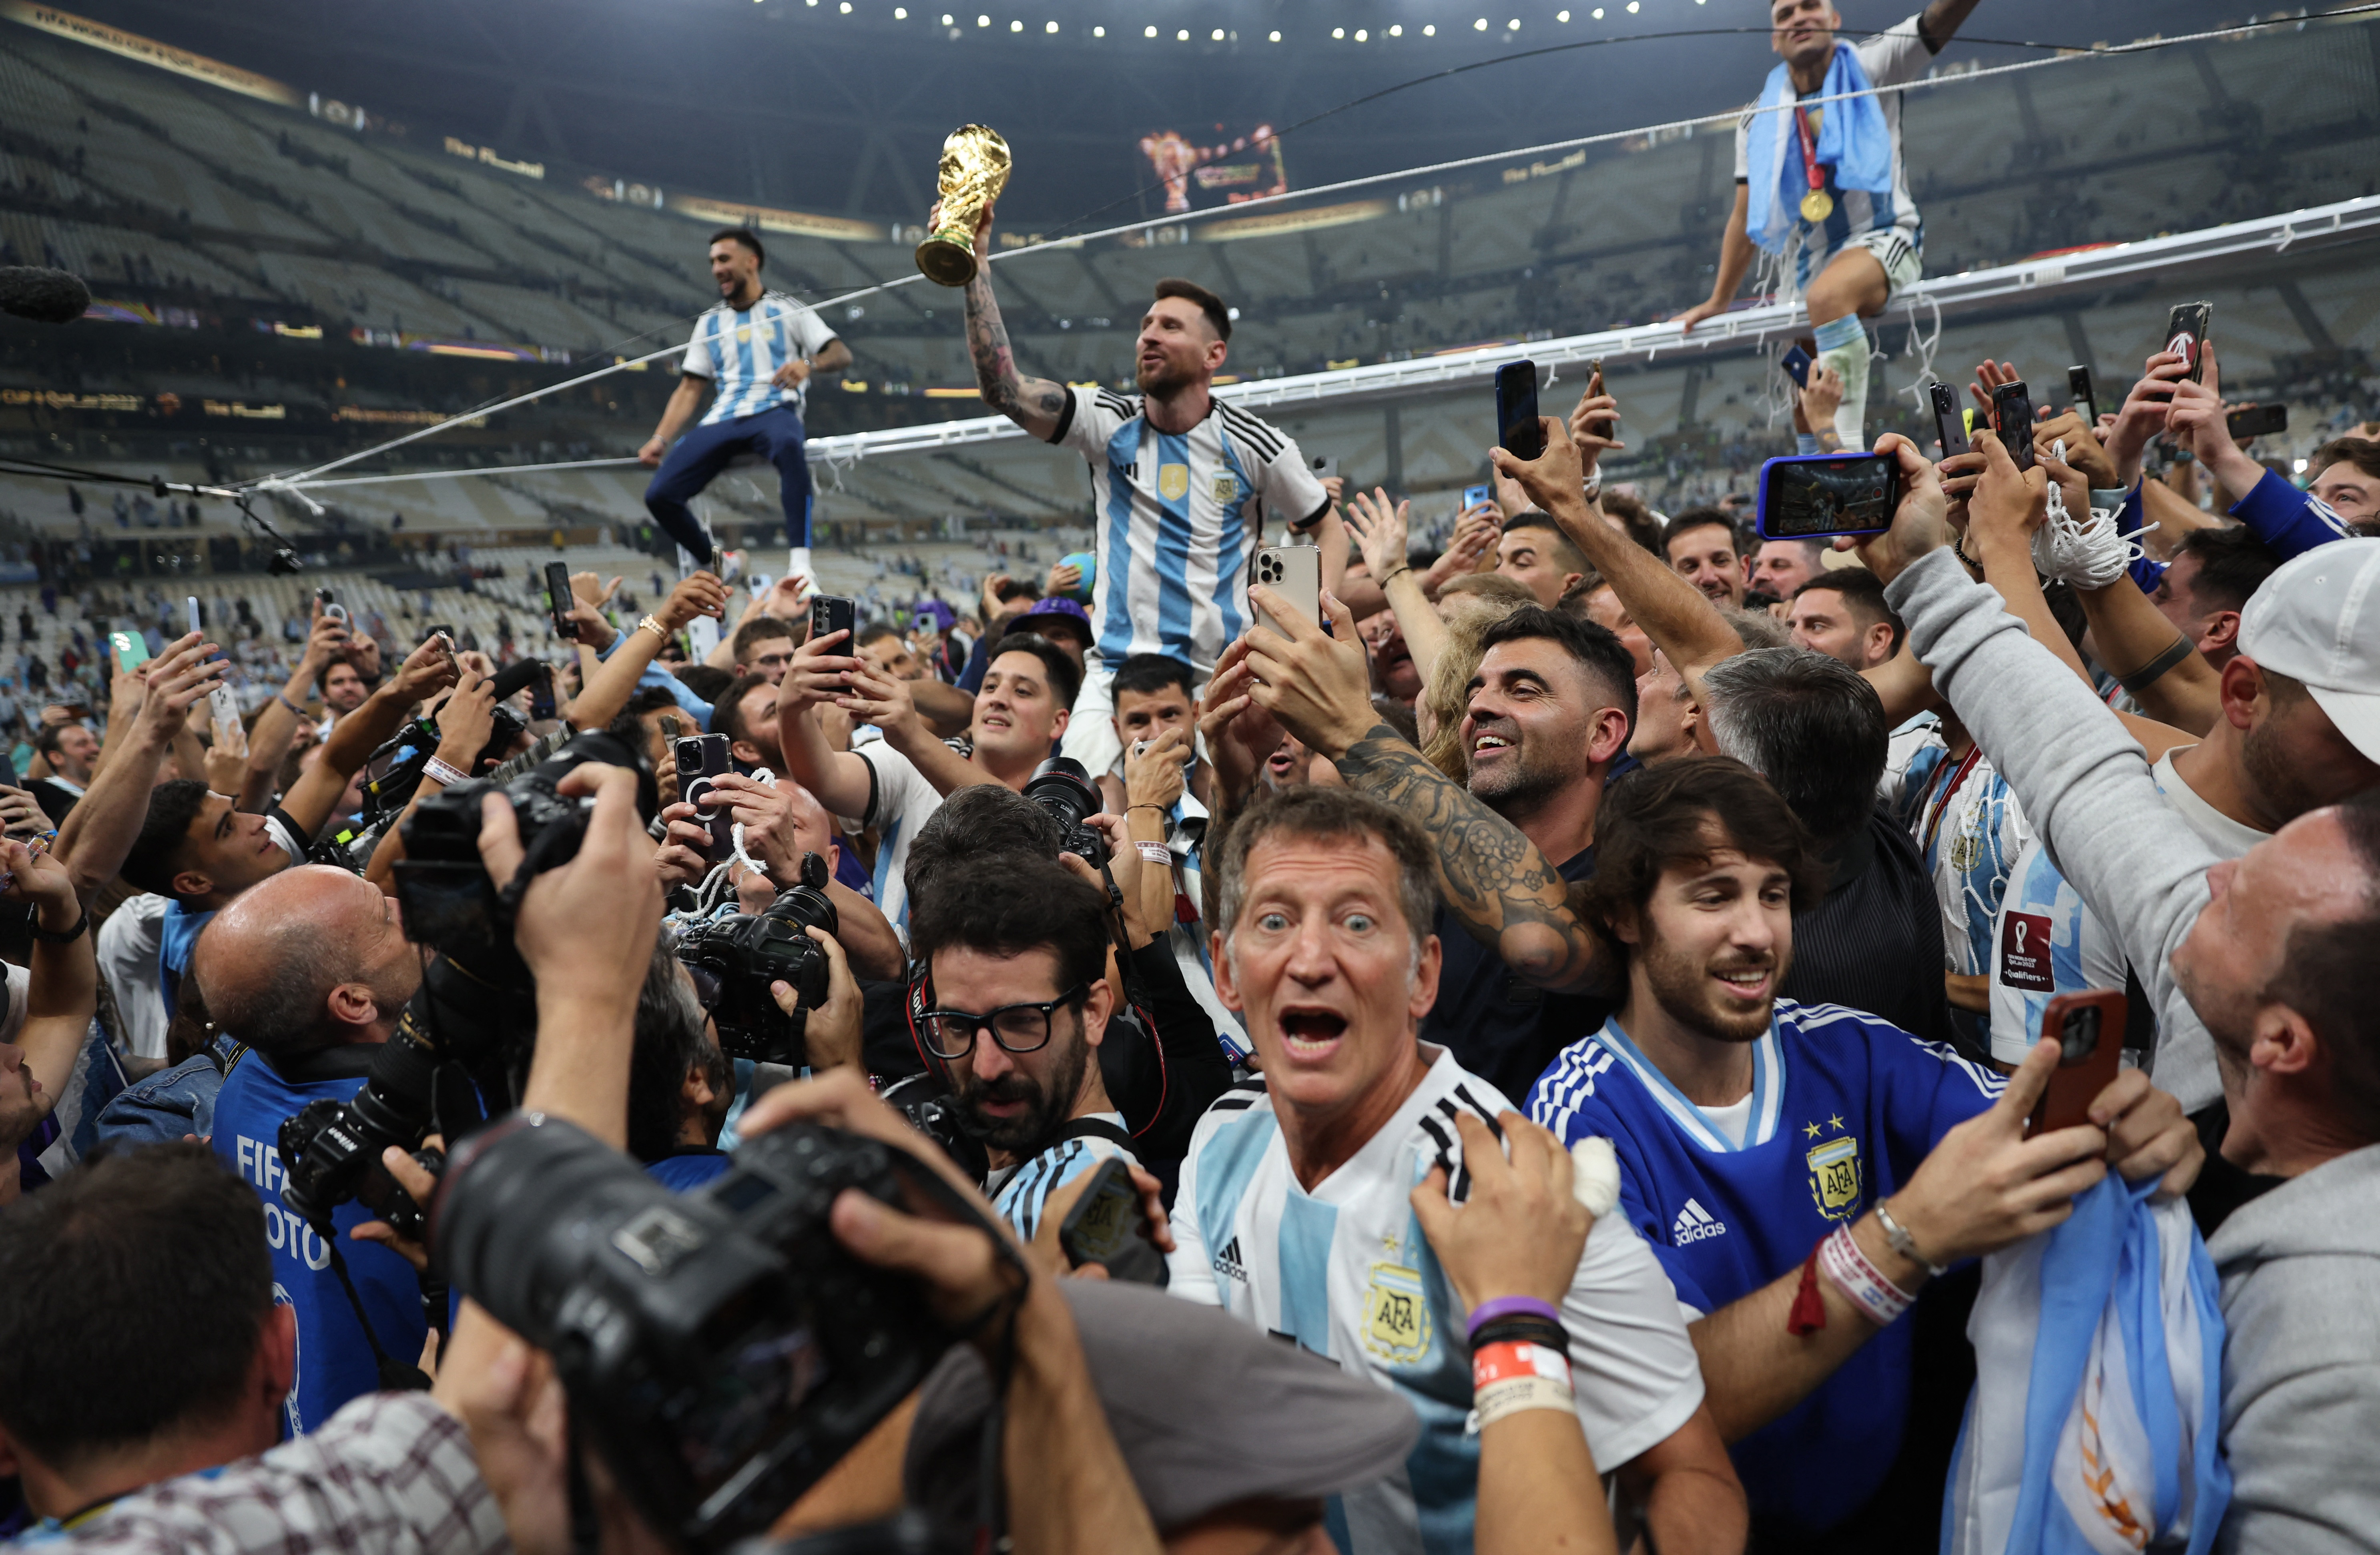 The manager who stunned Messi's Argentina and captain who led a rebellion  are behind France's World Cup reboot